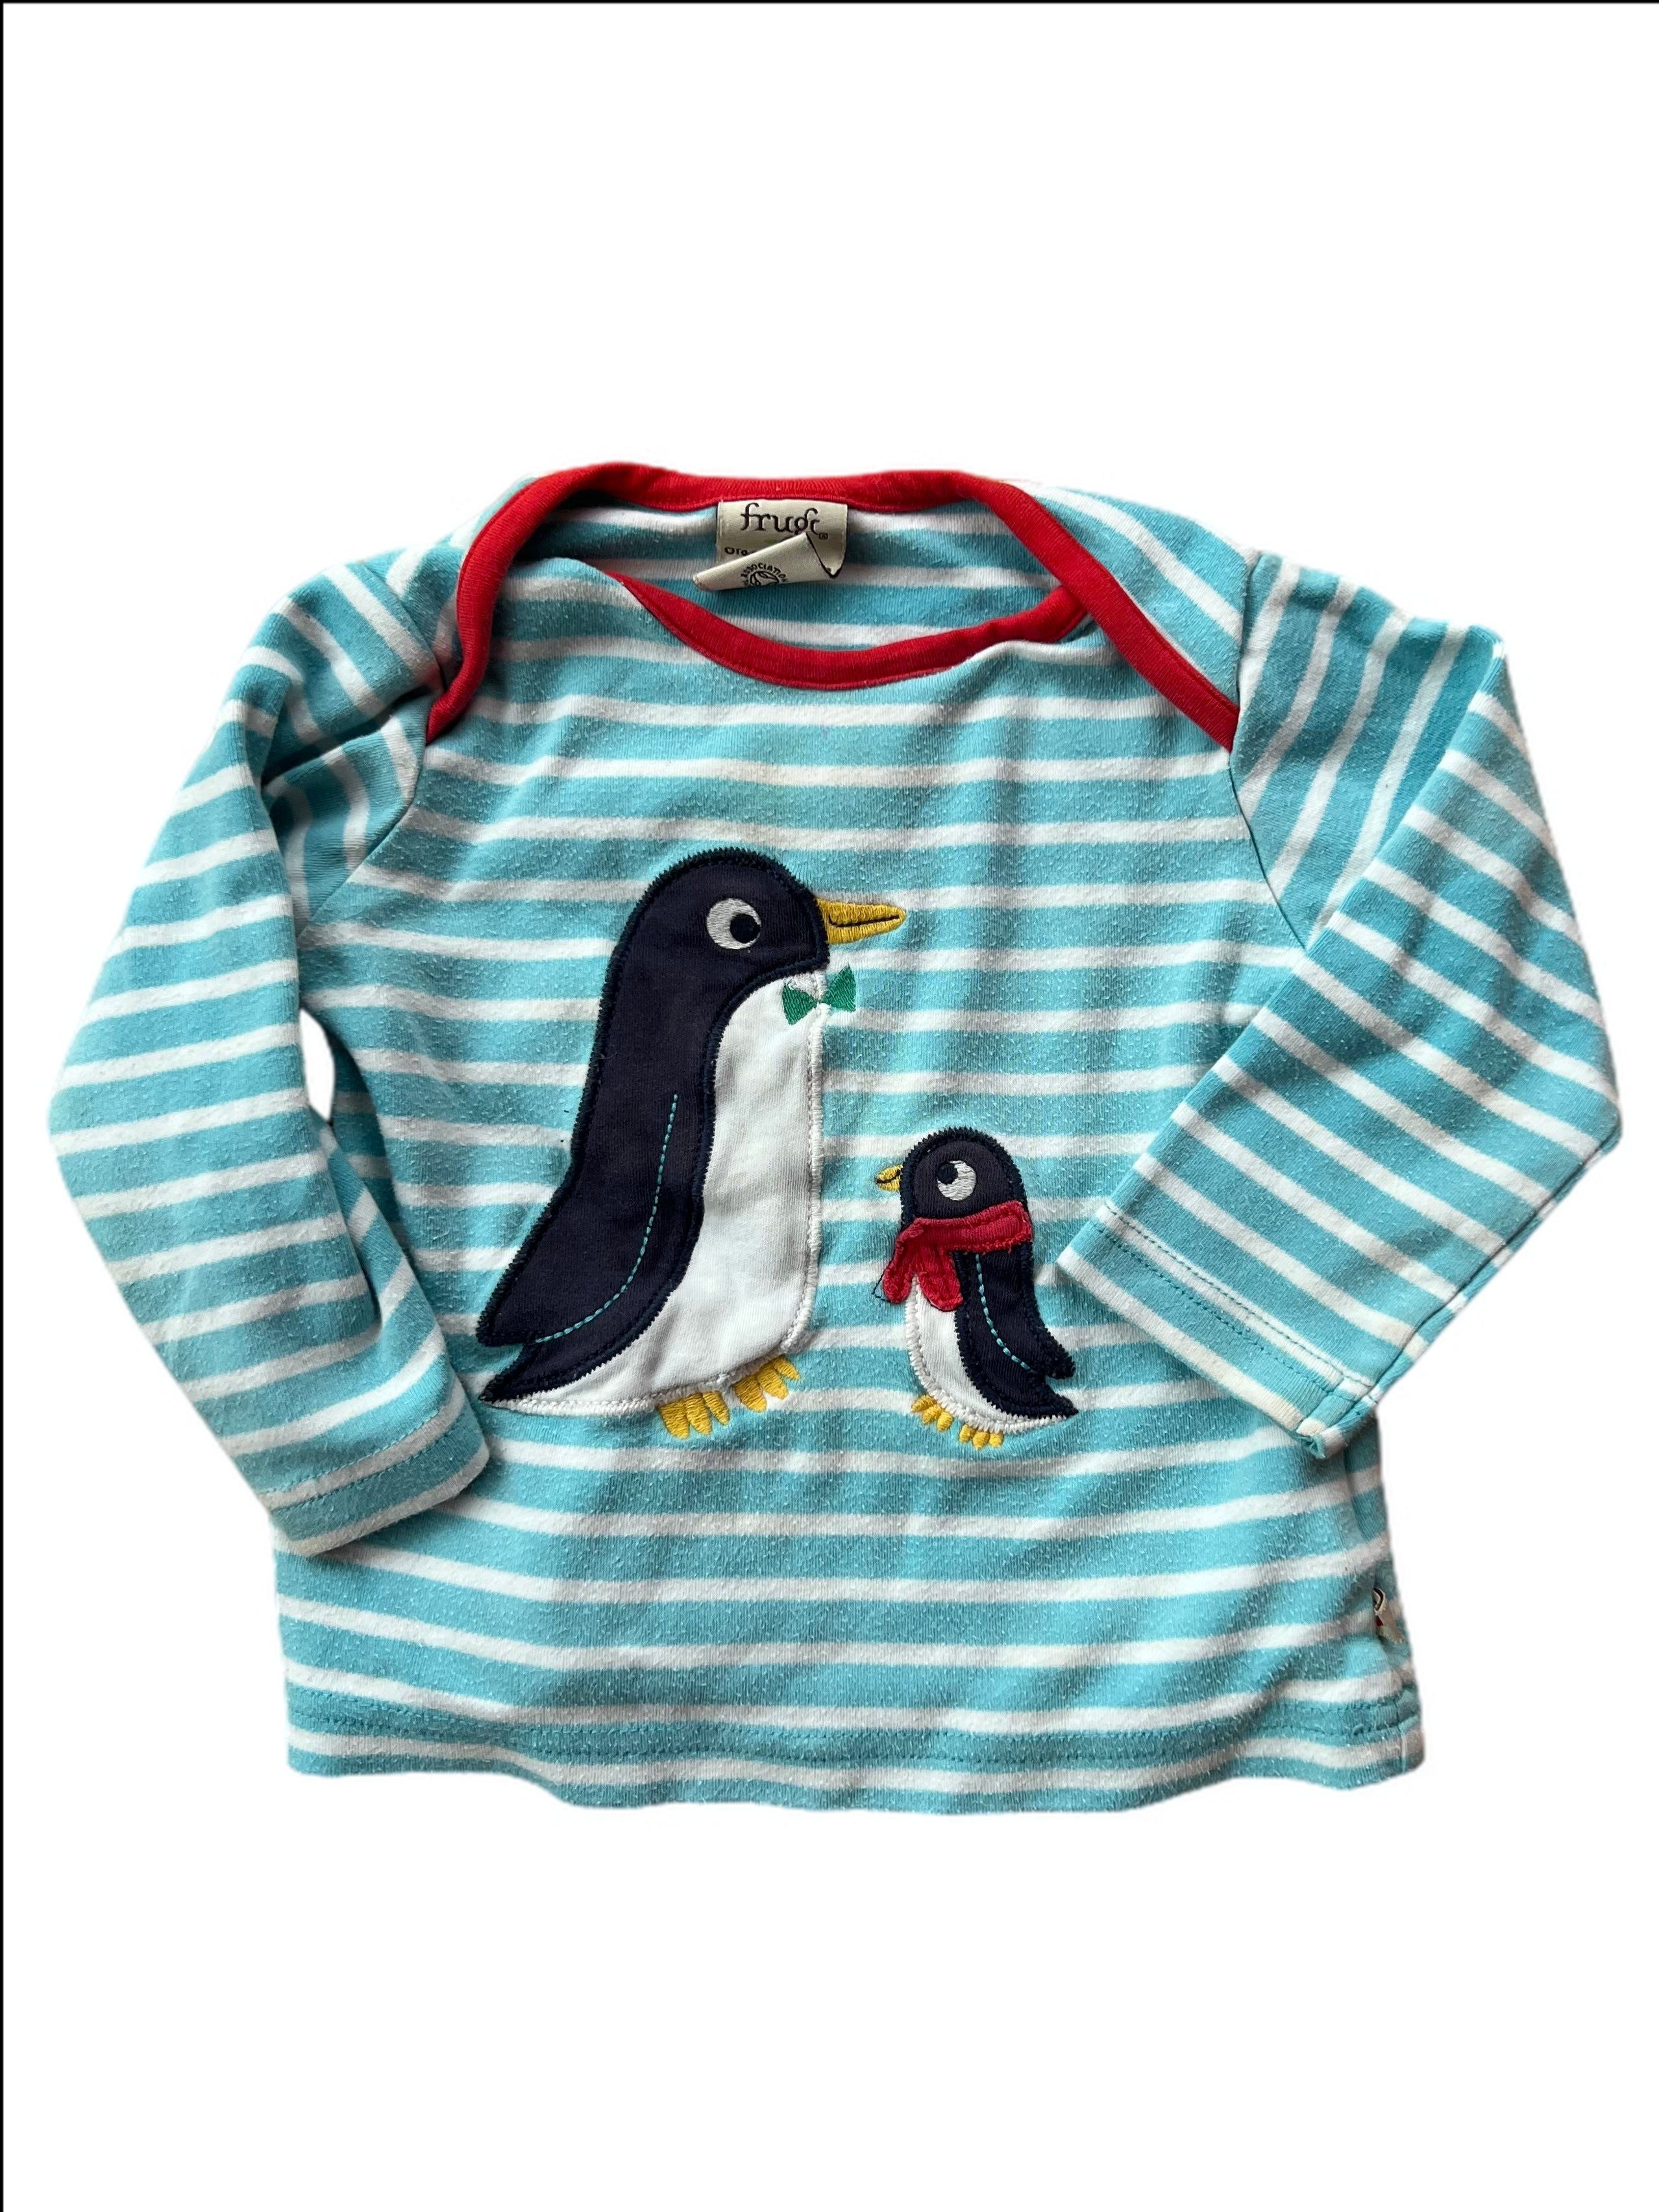 Long Sleeve Striped Top with two Penguin Applique